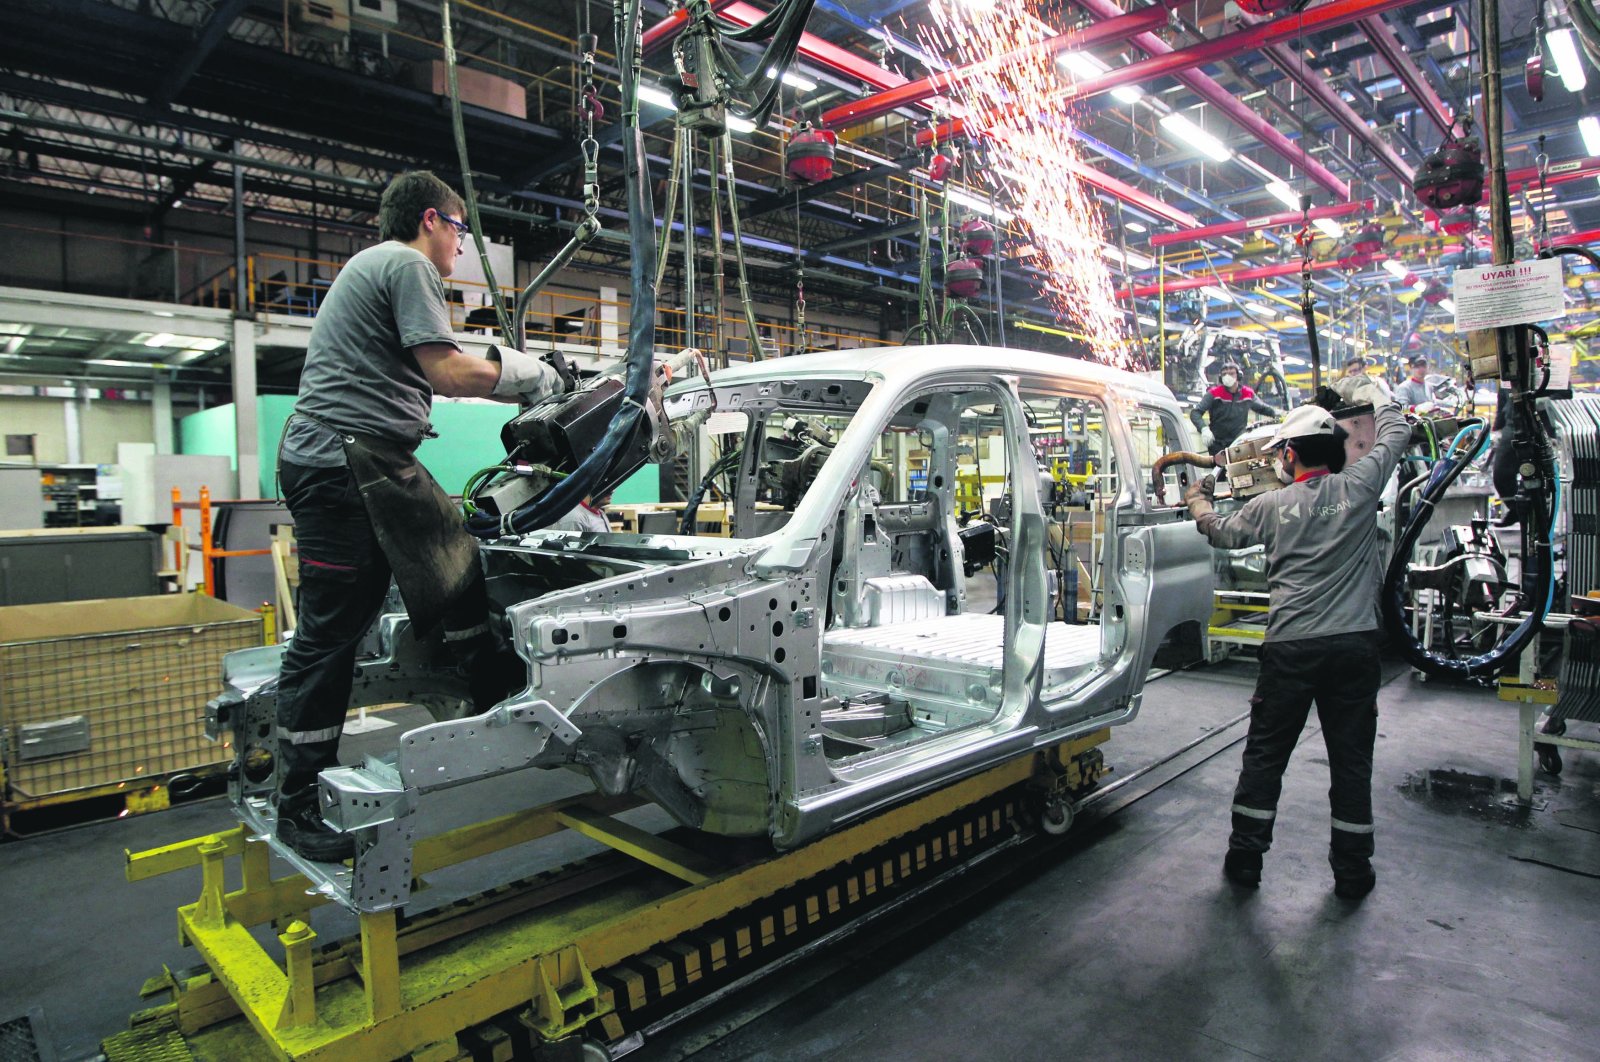 Employees work on the assembly line of the Karsan automotive factory in Bursa, Turkey, June 27, 2020. (Reuters Photo)